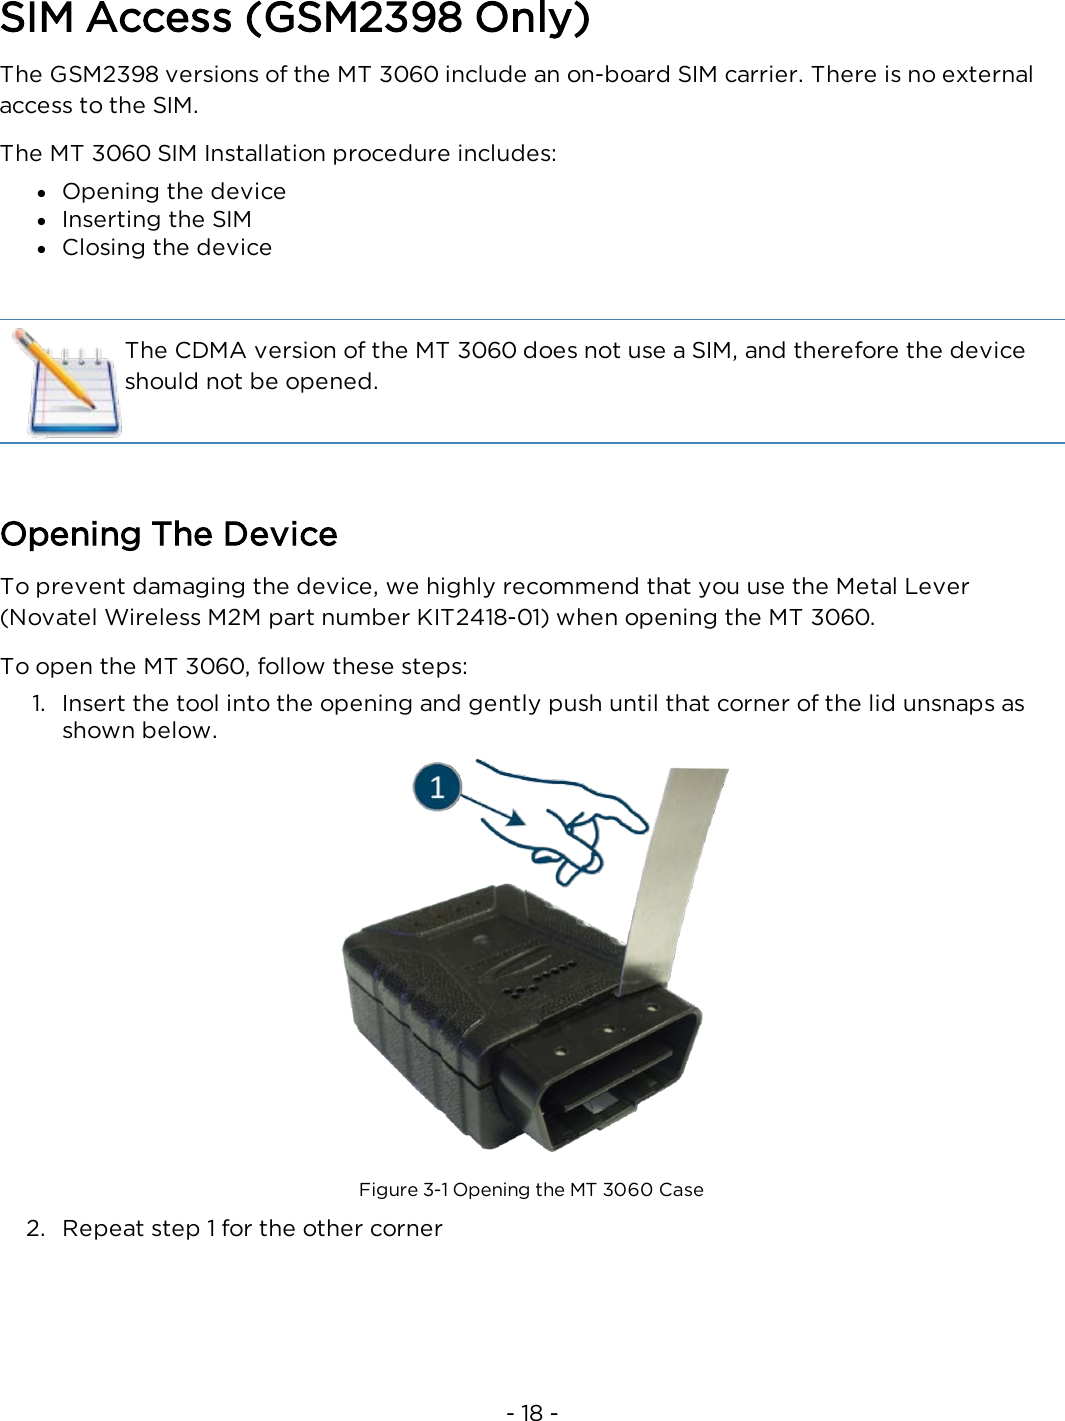 - 18 -SIM Access (GSM2398 Only)The GSM2398 versions of the MT 3060 include an on-board SIM carrier. There is no externalaccess to the SIM.The MT 3060 SIM Installation procedure includes:lOpening the devicelInserting the SIMlClosing the deviceThe CDMA version of the MT 3060 does not use a SIM, and therefore the deviceshould not be opened.Opening The DeviceTo prevent damaging the device, we highly recommend that you use the Metal Lever(Novatel Wireless M2M part number KIT2418-01) when opening the MT 3060.To open the MT 3060, follow these steps:1. Insert the tool into the opening and gently push until that corner of the lid unsnaps asshown below.Figure 3-1 Opening the MT 3060 Case2. Repeat step 1 for the other corner